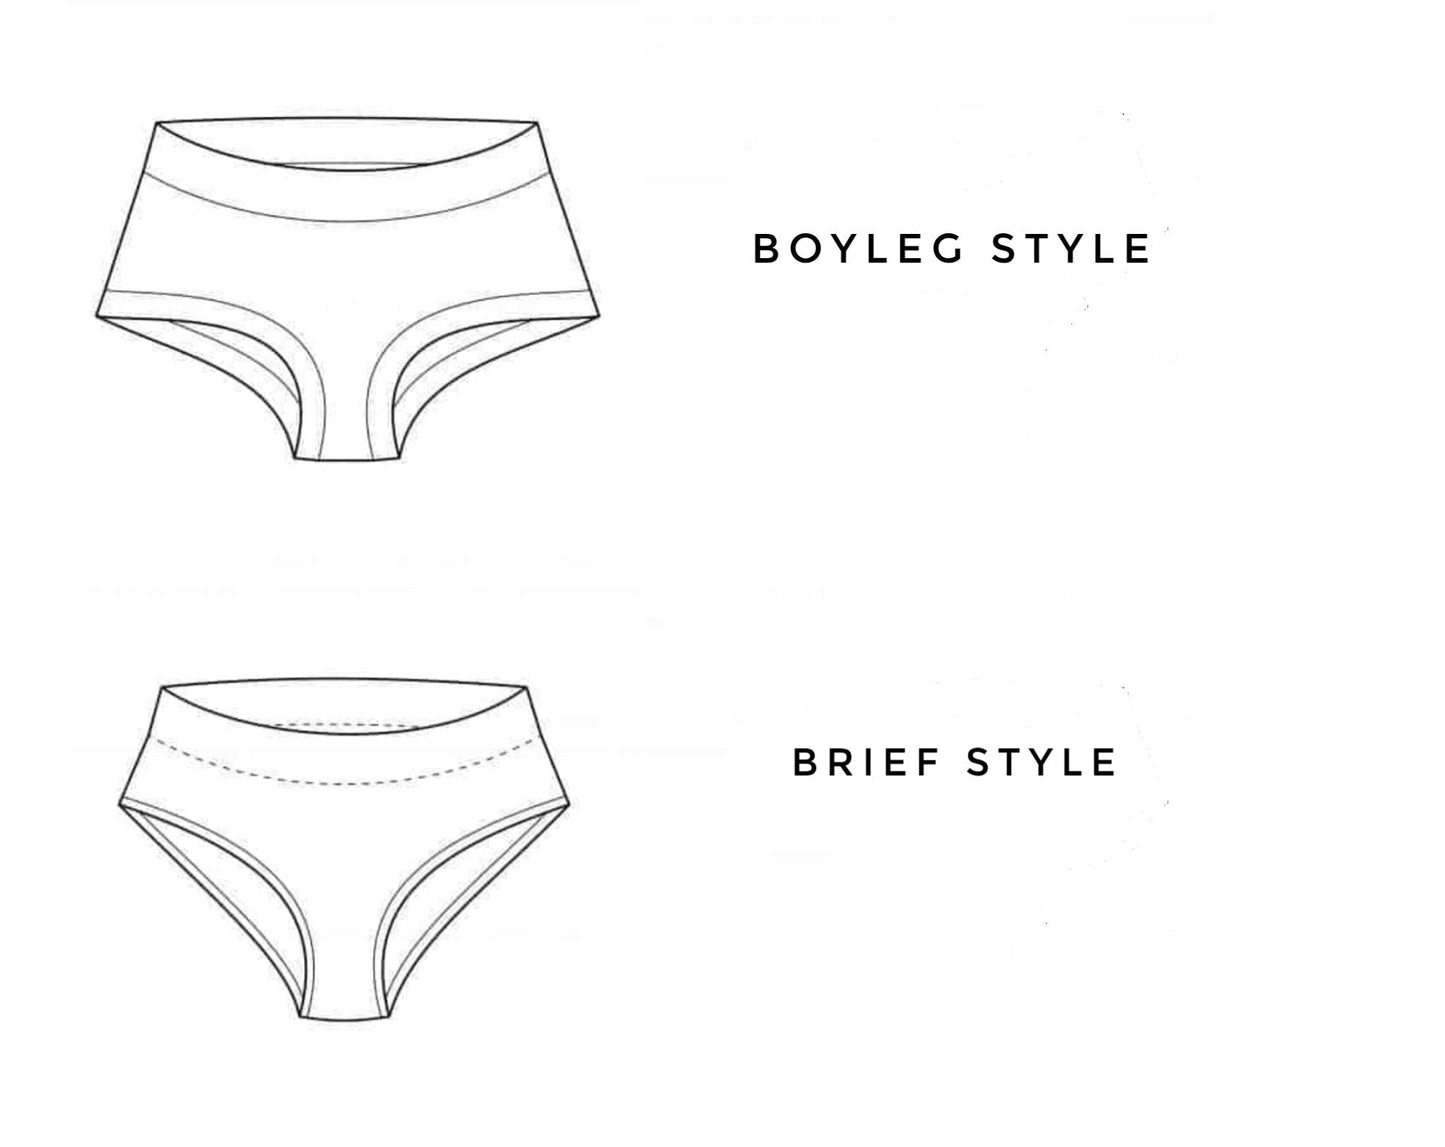 YOUR CHOICE of solid COLOR organic women's boyleg or brief undies